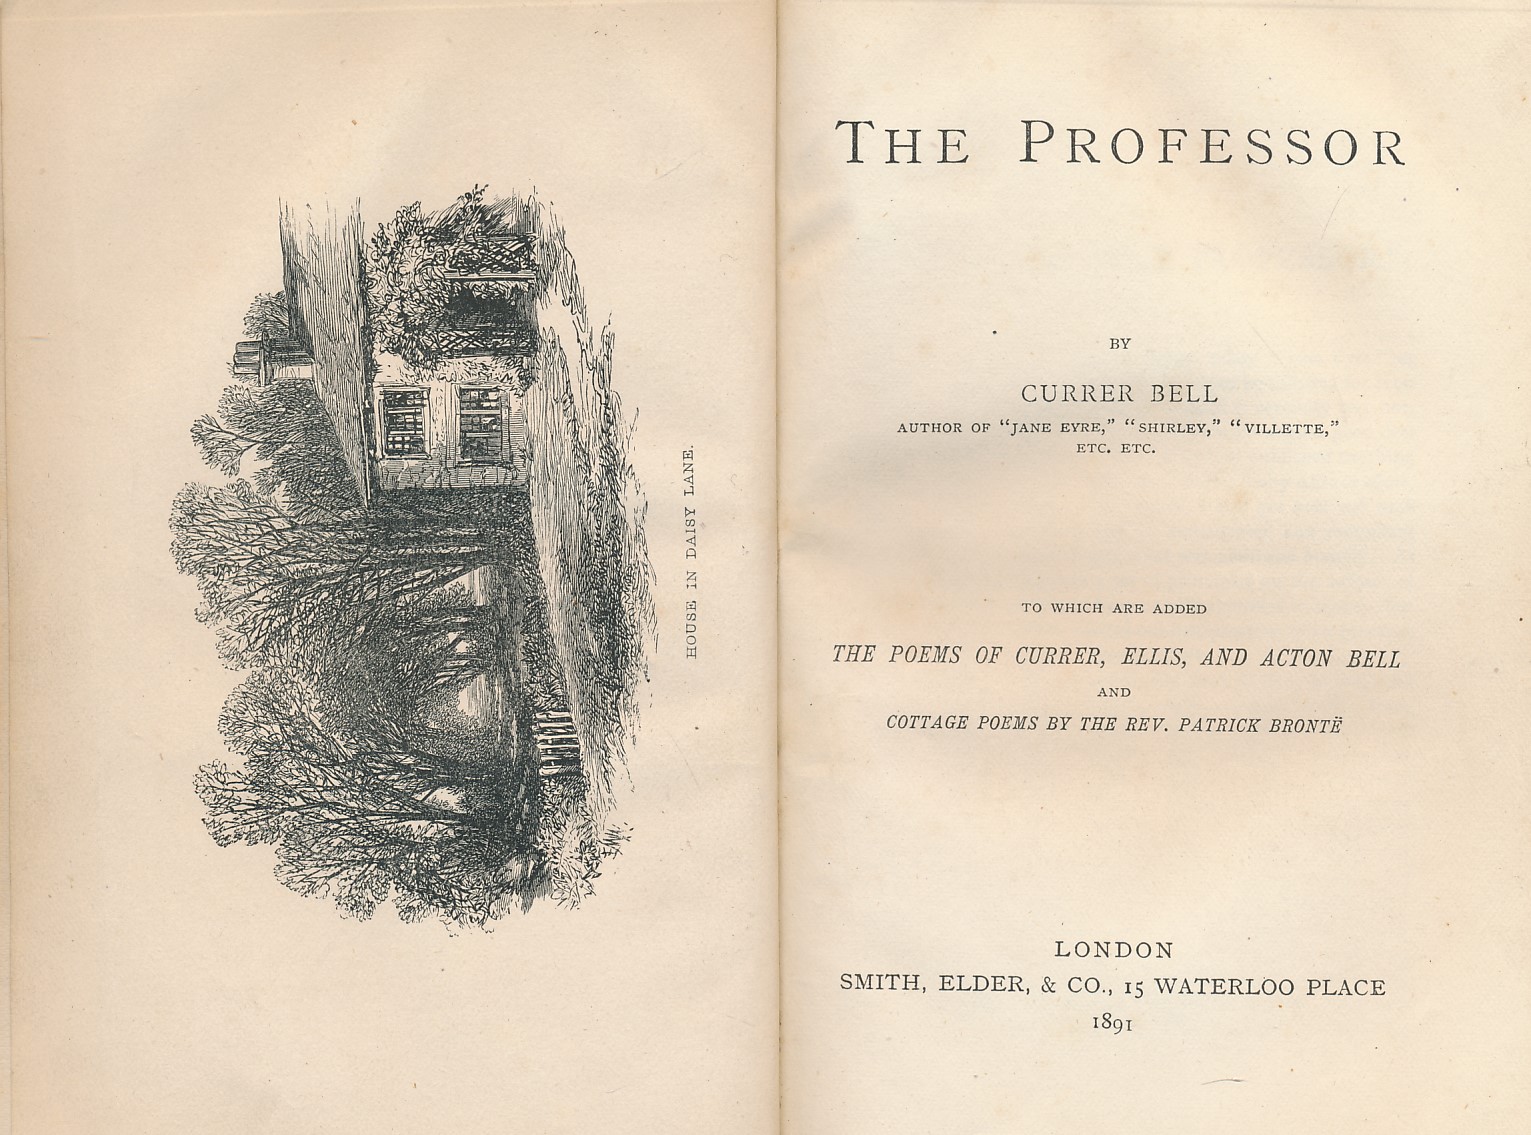 The Professor. To which are added the Poems of Currer, Ellis and Acton Bell and Cottage Poems by The Rev. Patrick Bront. Smith edition. 1891.